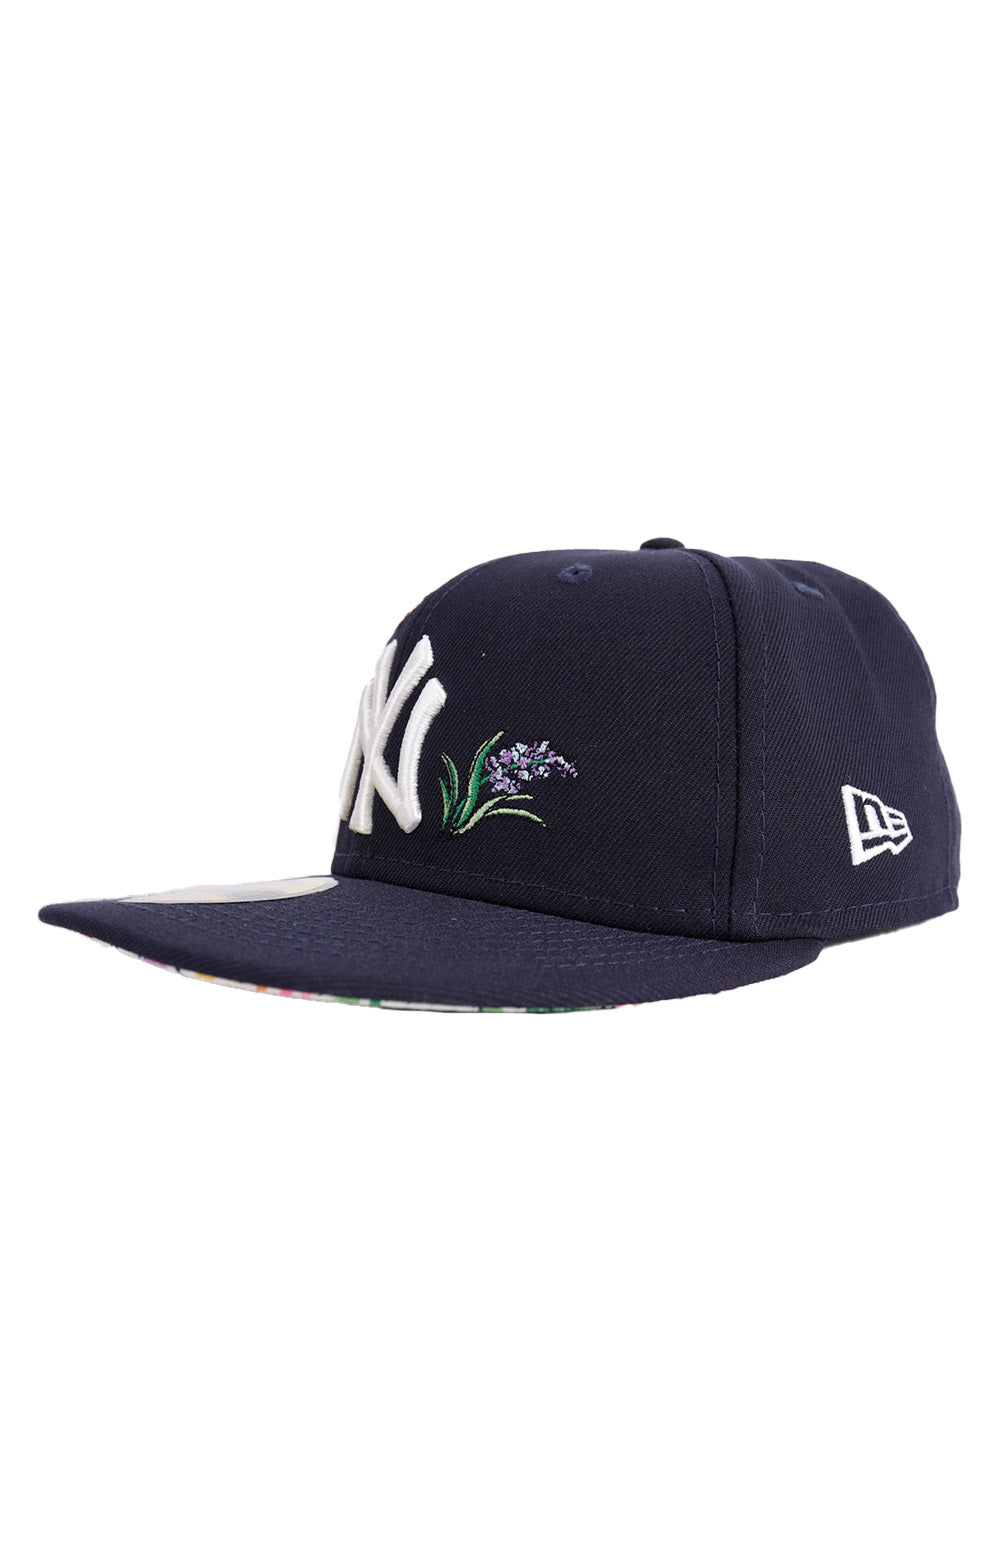 NY Yankees Watercolor Floral 59FIFTY Fitted Hat